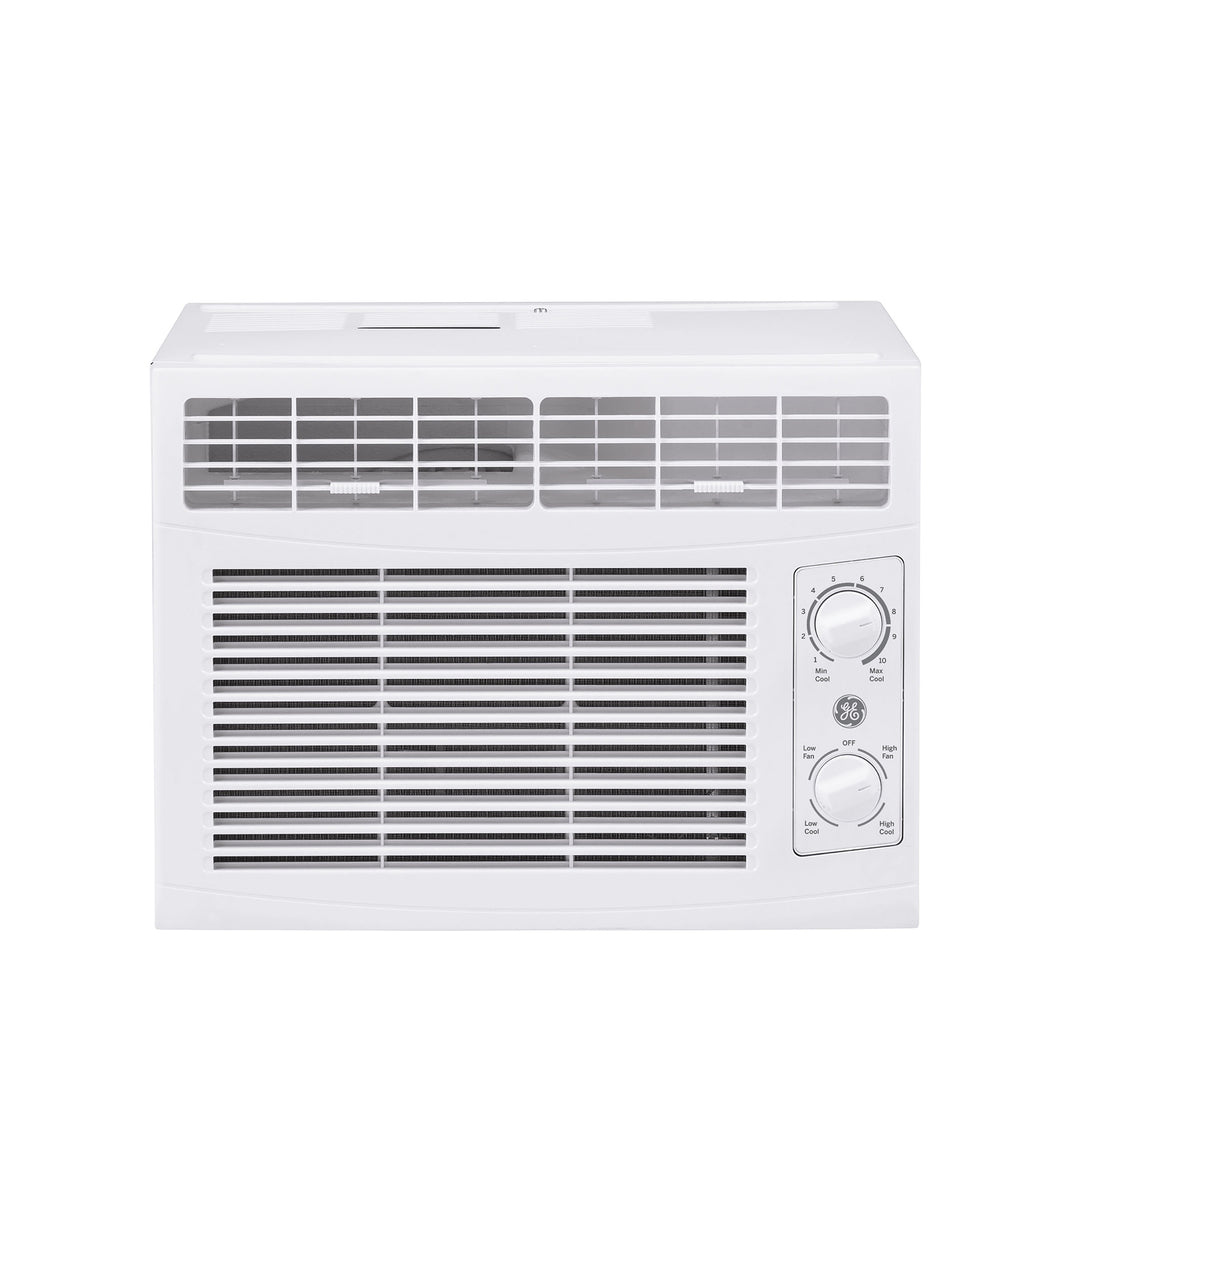 GE(R) 5,000 BTU Mechanical Window Air Conditioner for Small Rooms up to 150 sq ft. - (AHV05LZ)